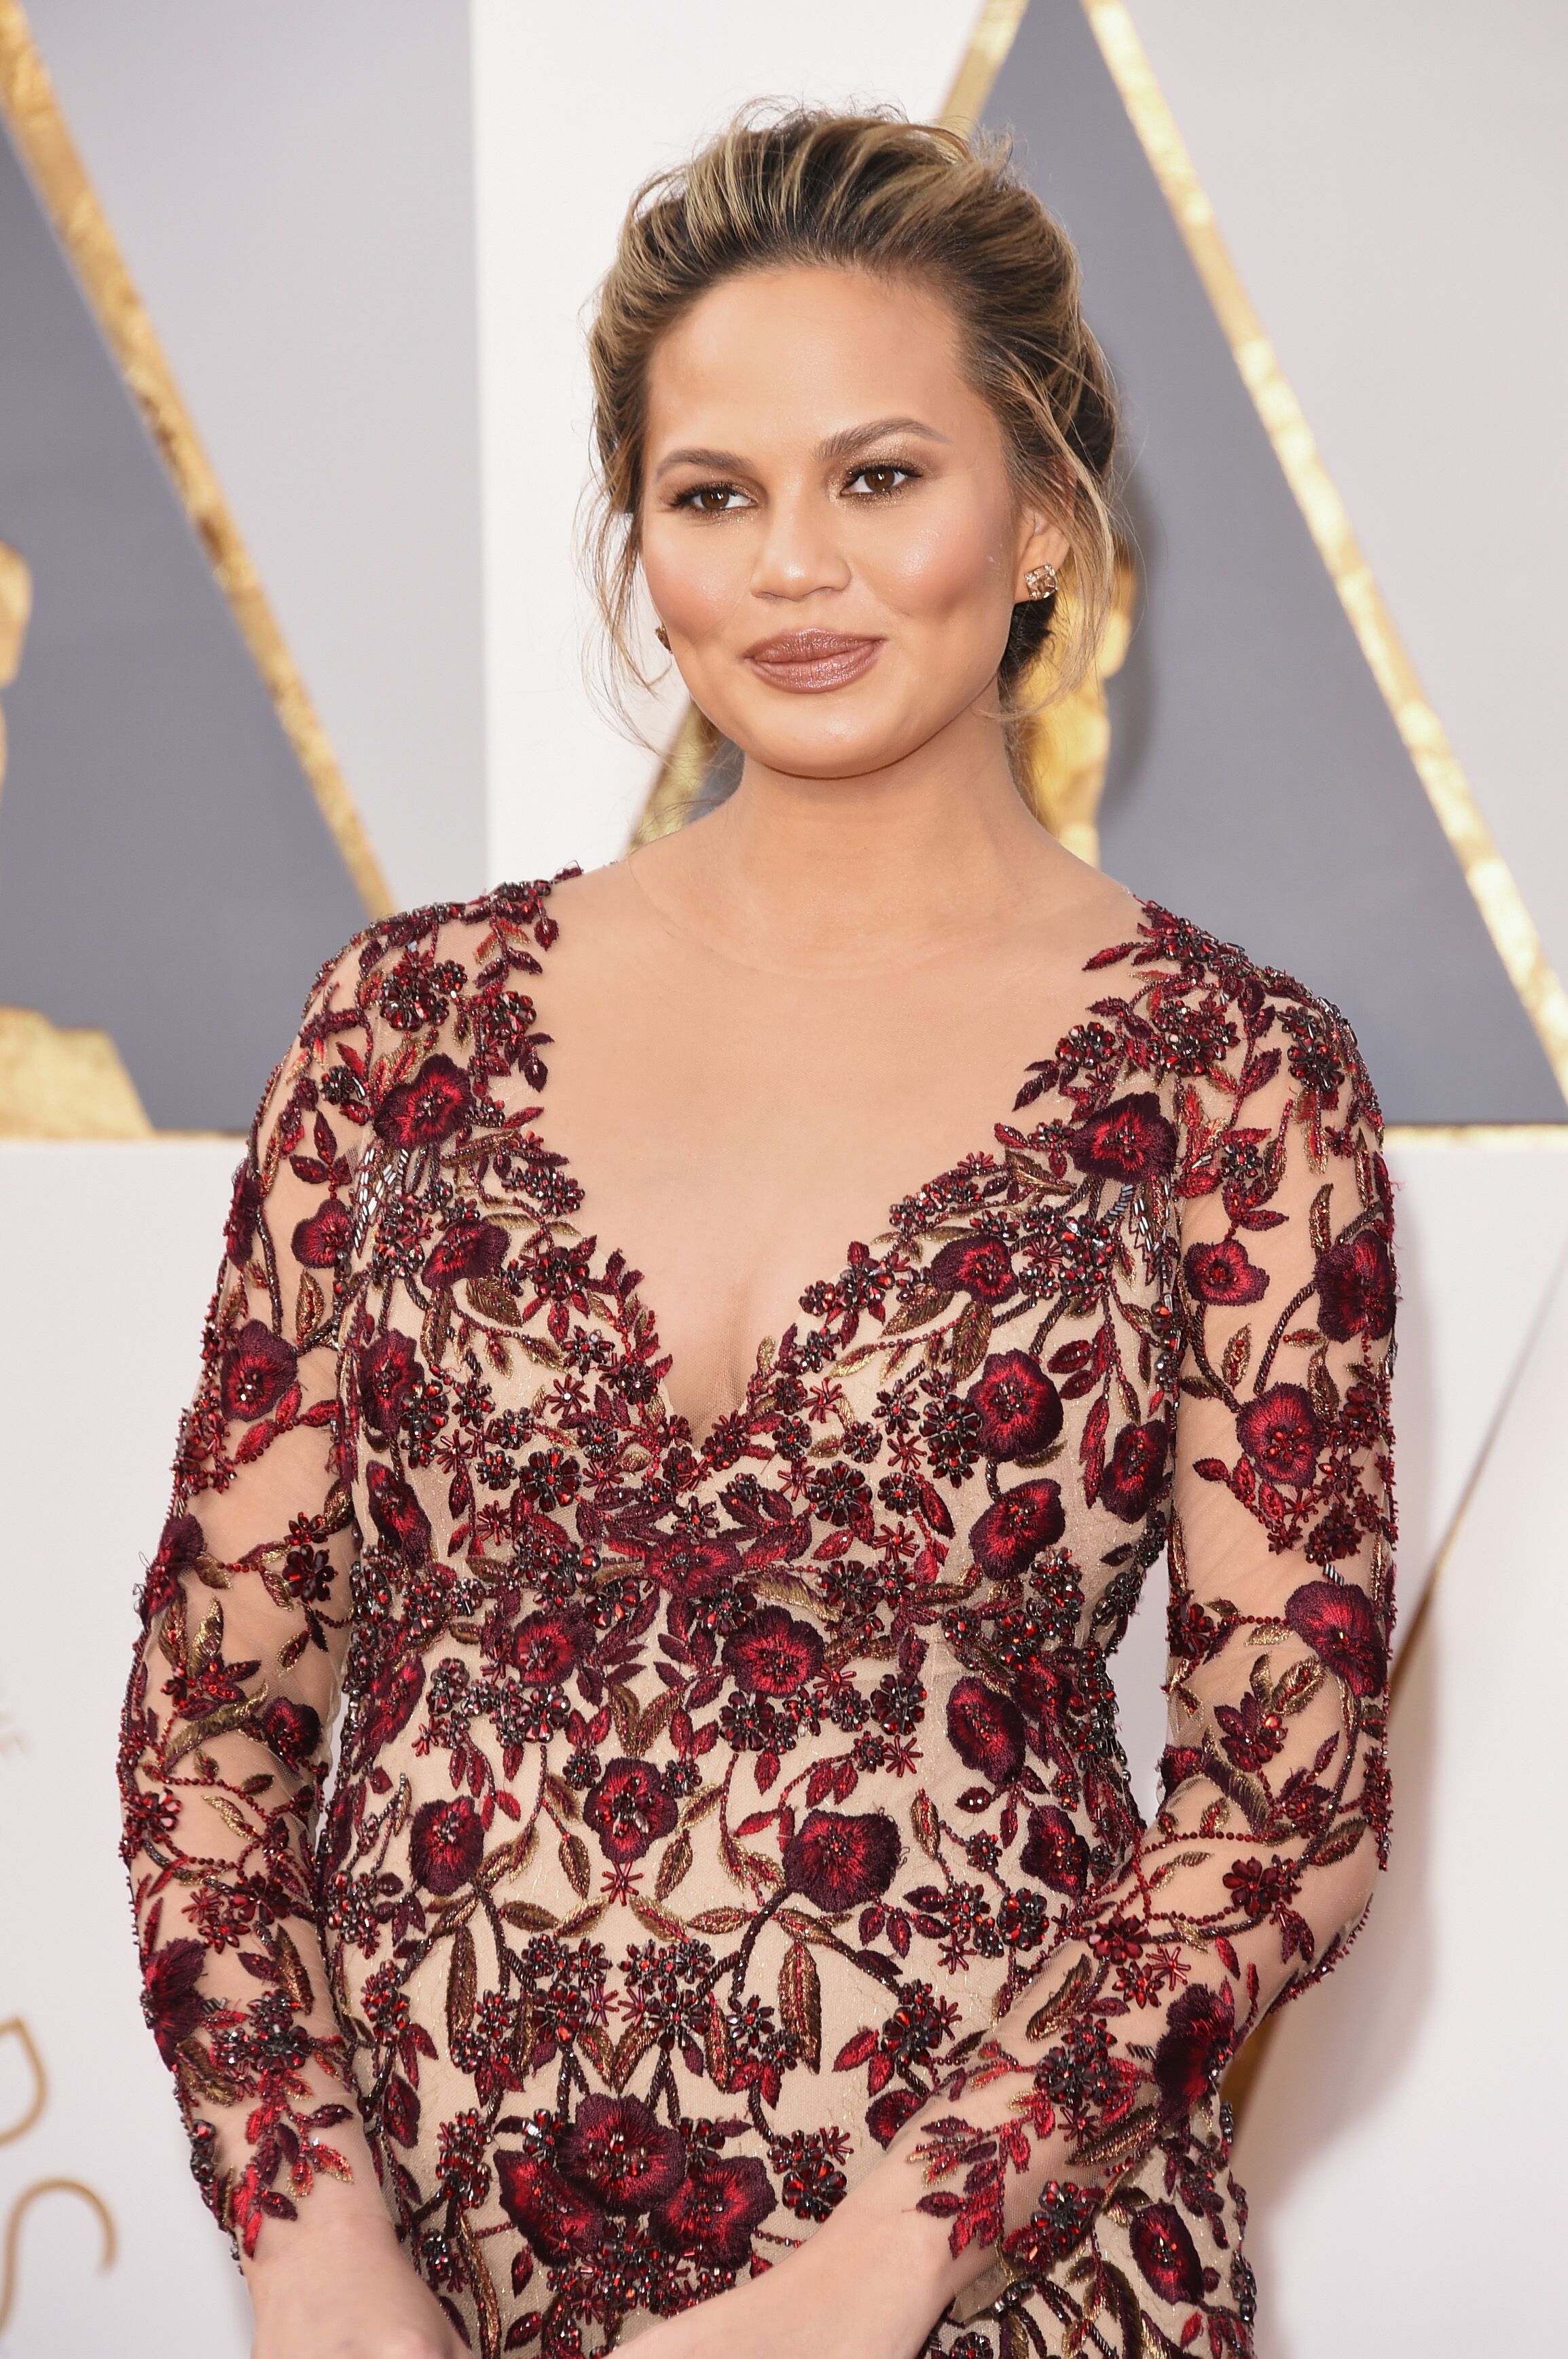 Model Chrissy Teigen attends the 88th Annual Academy Awards at Hollywood & Highland Center on February 28, 2016 | Photo: Getty Images